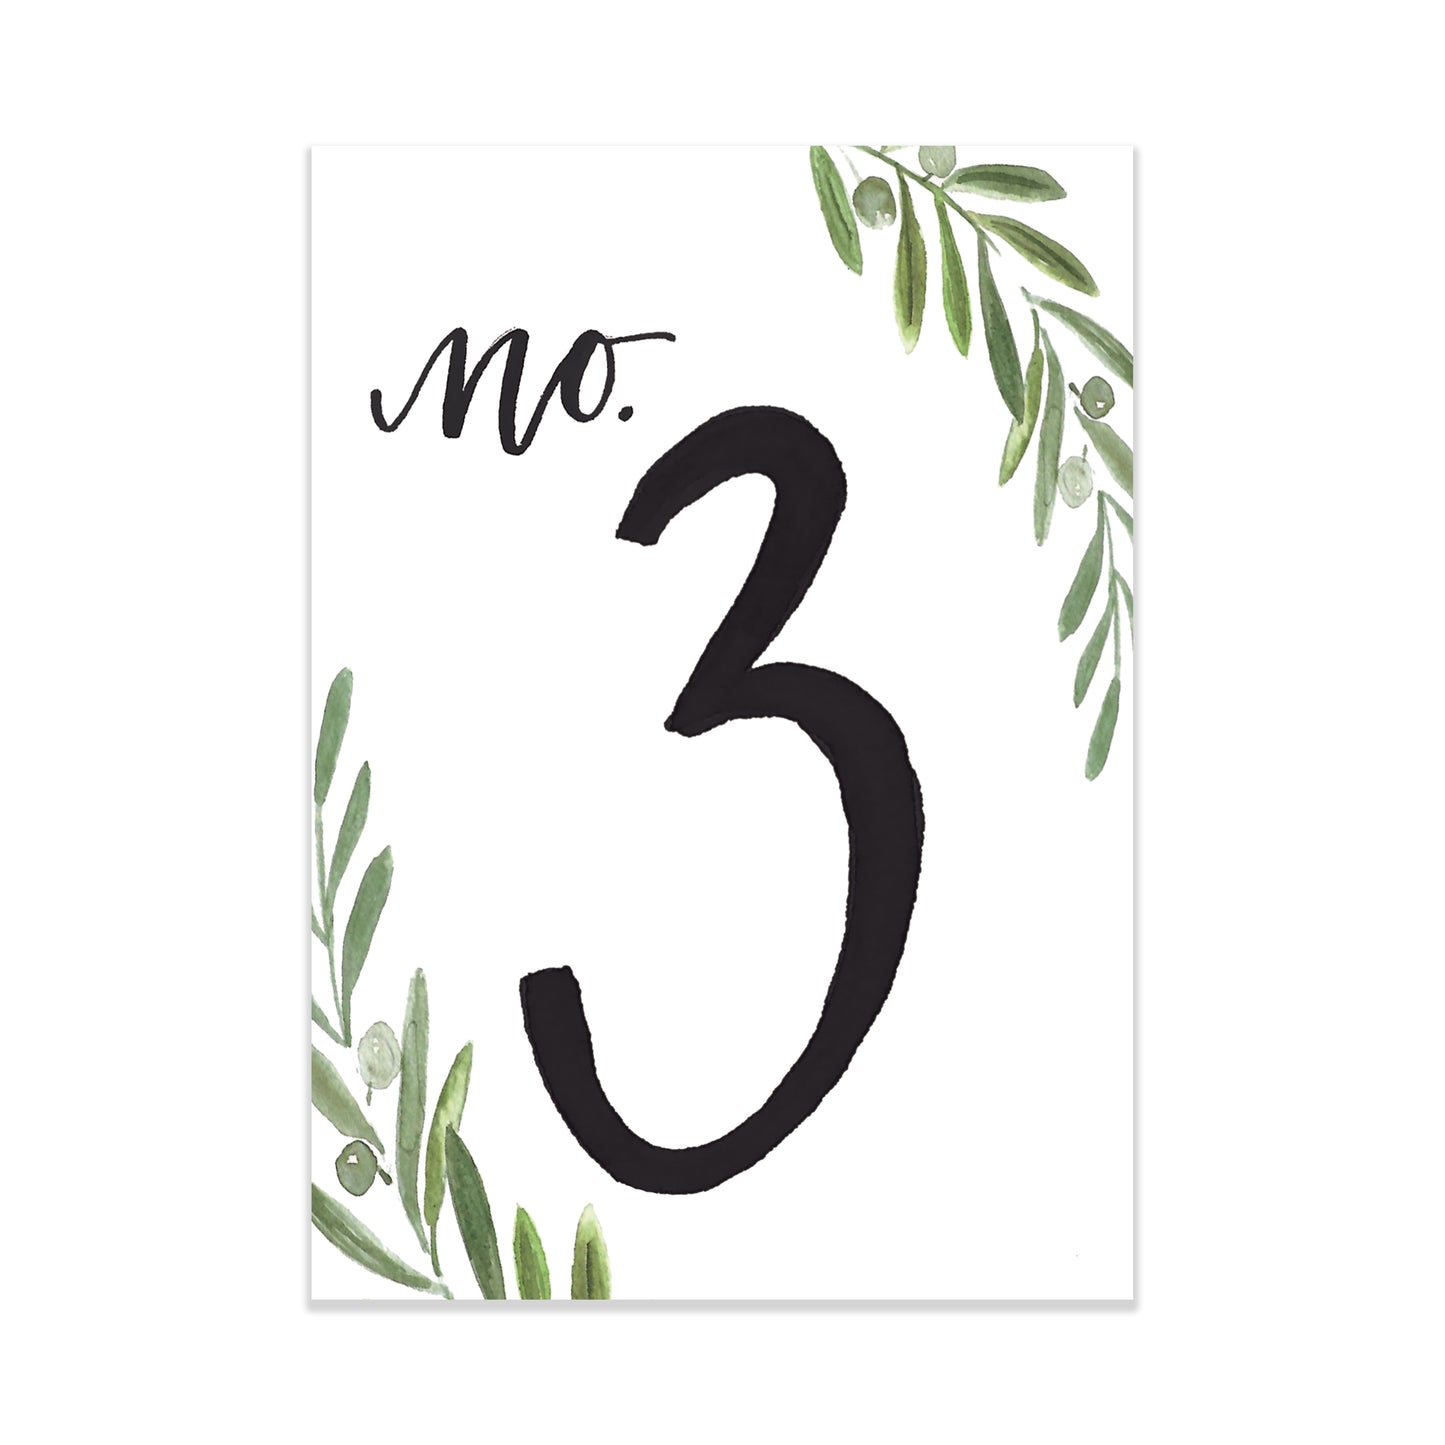 Oh Joyful Day Wedding Table Numbers Colorful table numbers wedding decorations jewel tone wedding jewel tone wedding decorations set of table numbers printed table numbers Pittsburgh weddings watercolor floral table numbers floral table numbers greenery table numbers watercolor wedding details 